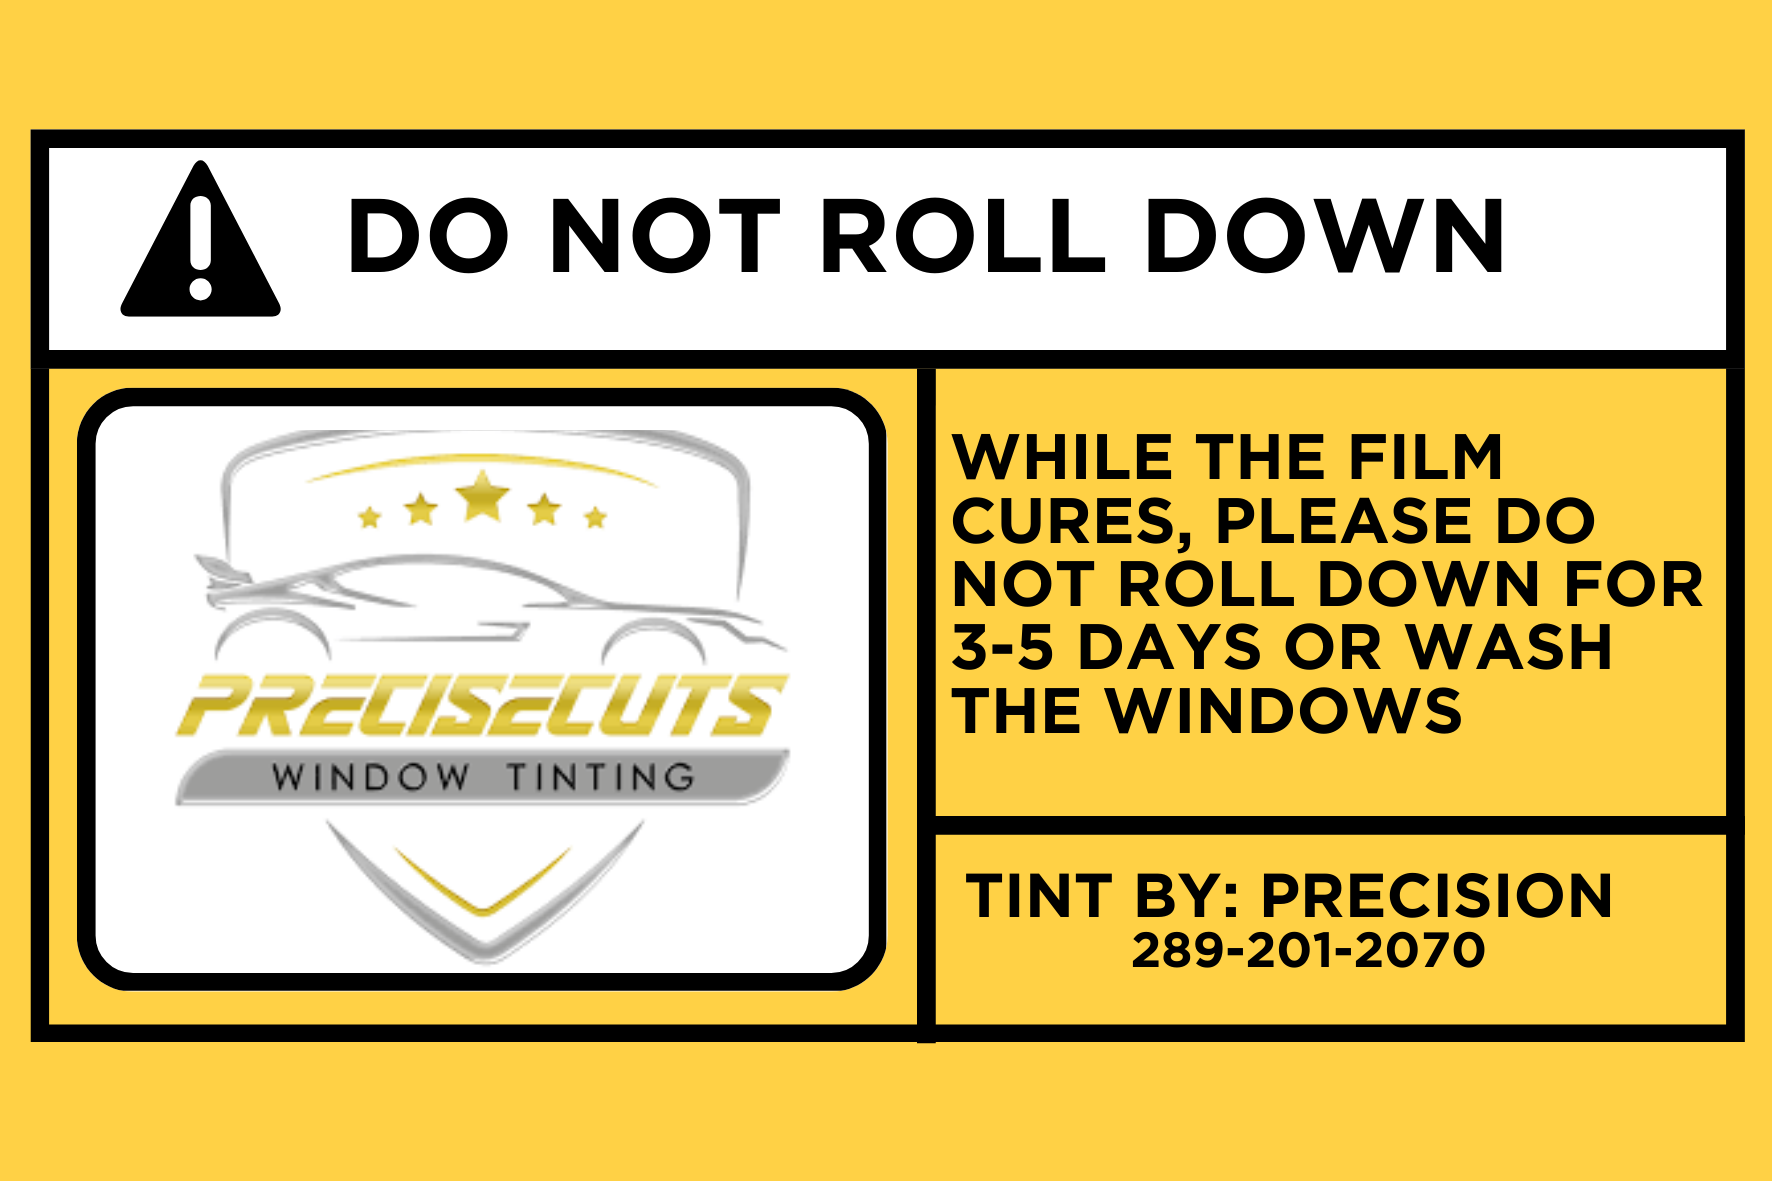 DO NOT ROLL DOWN STICKERS: CUSTOM WARNING STICKERS